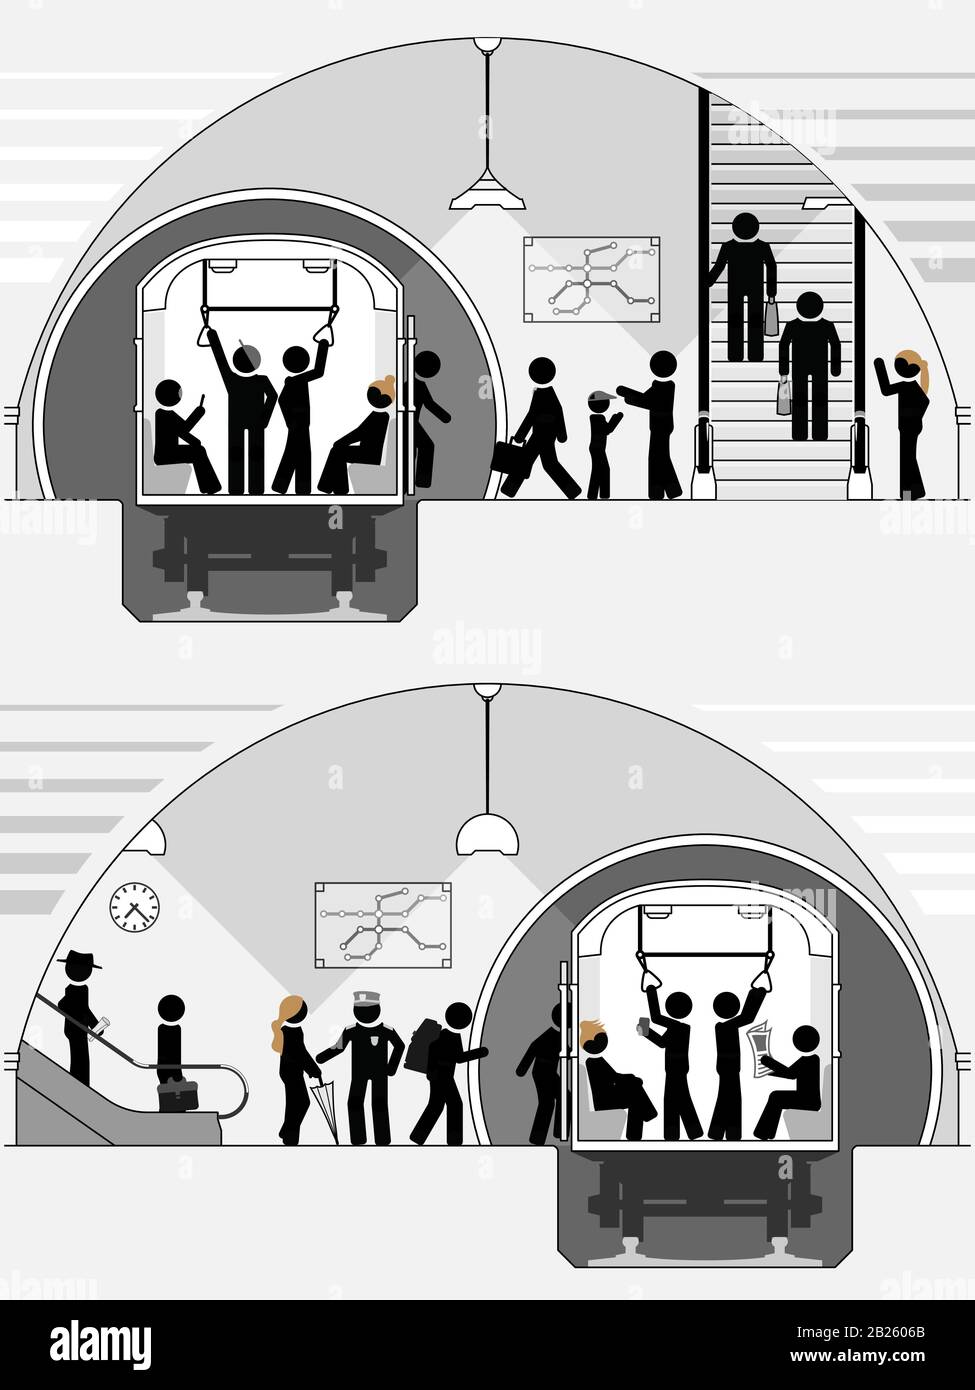 Busy underground rapid transit system. Stock Vector